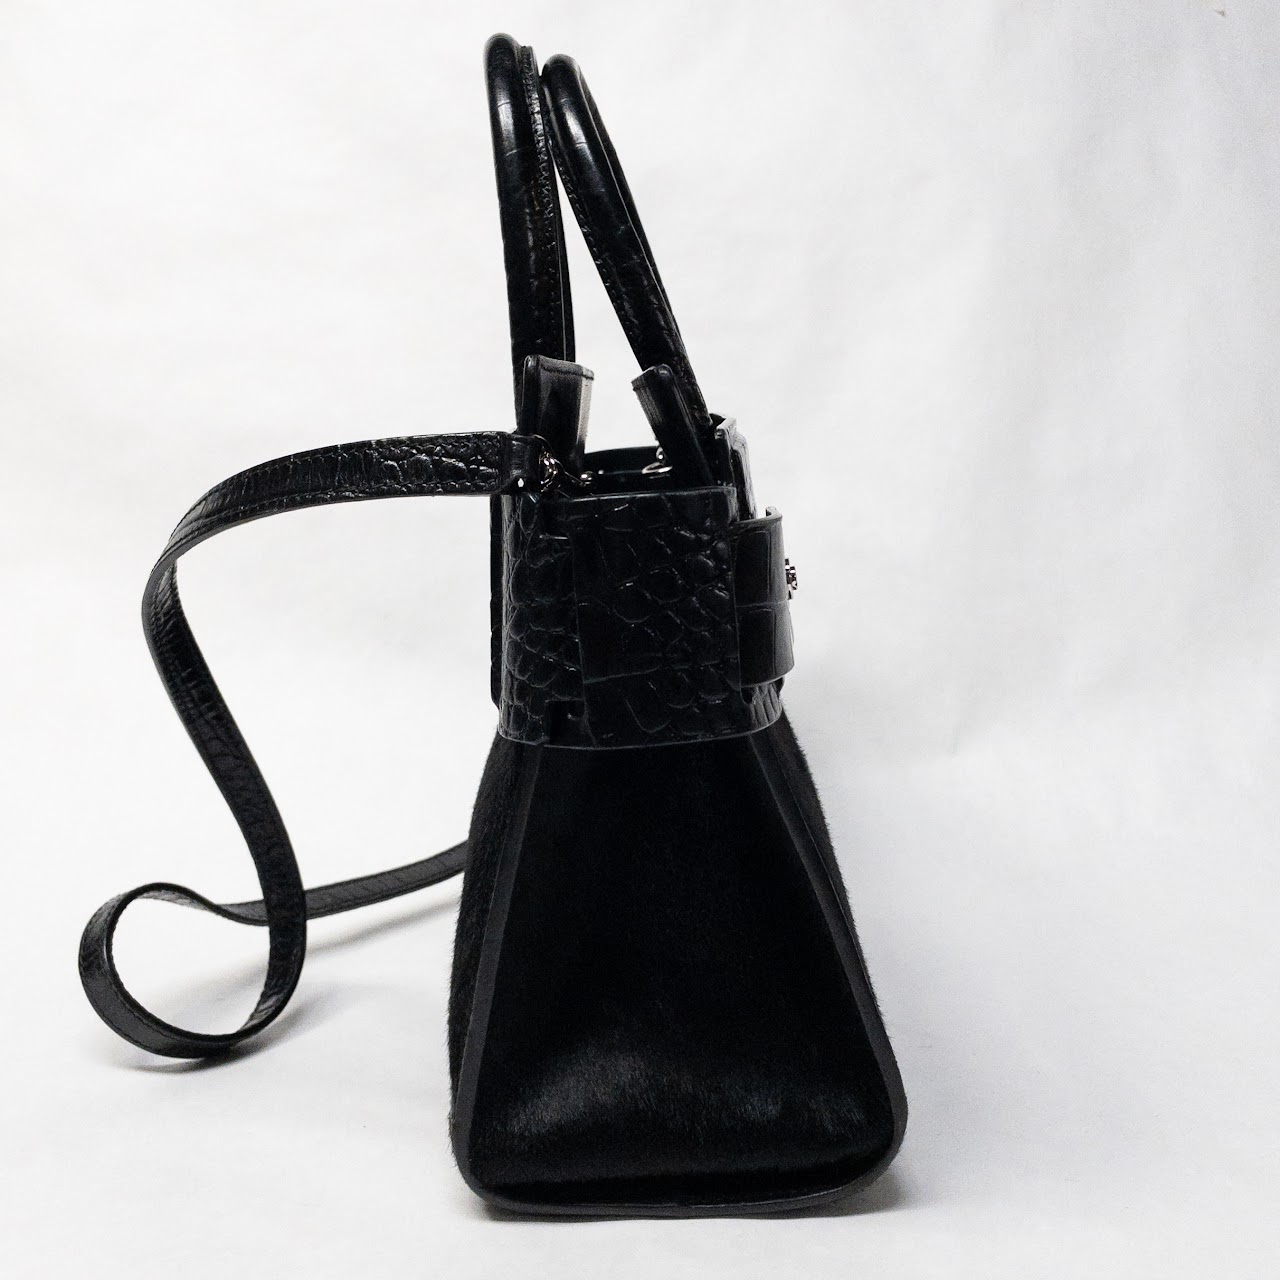 Givenchy Patent Leather & Pony Hair Shoulder Bag